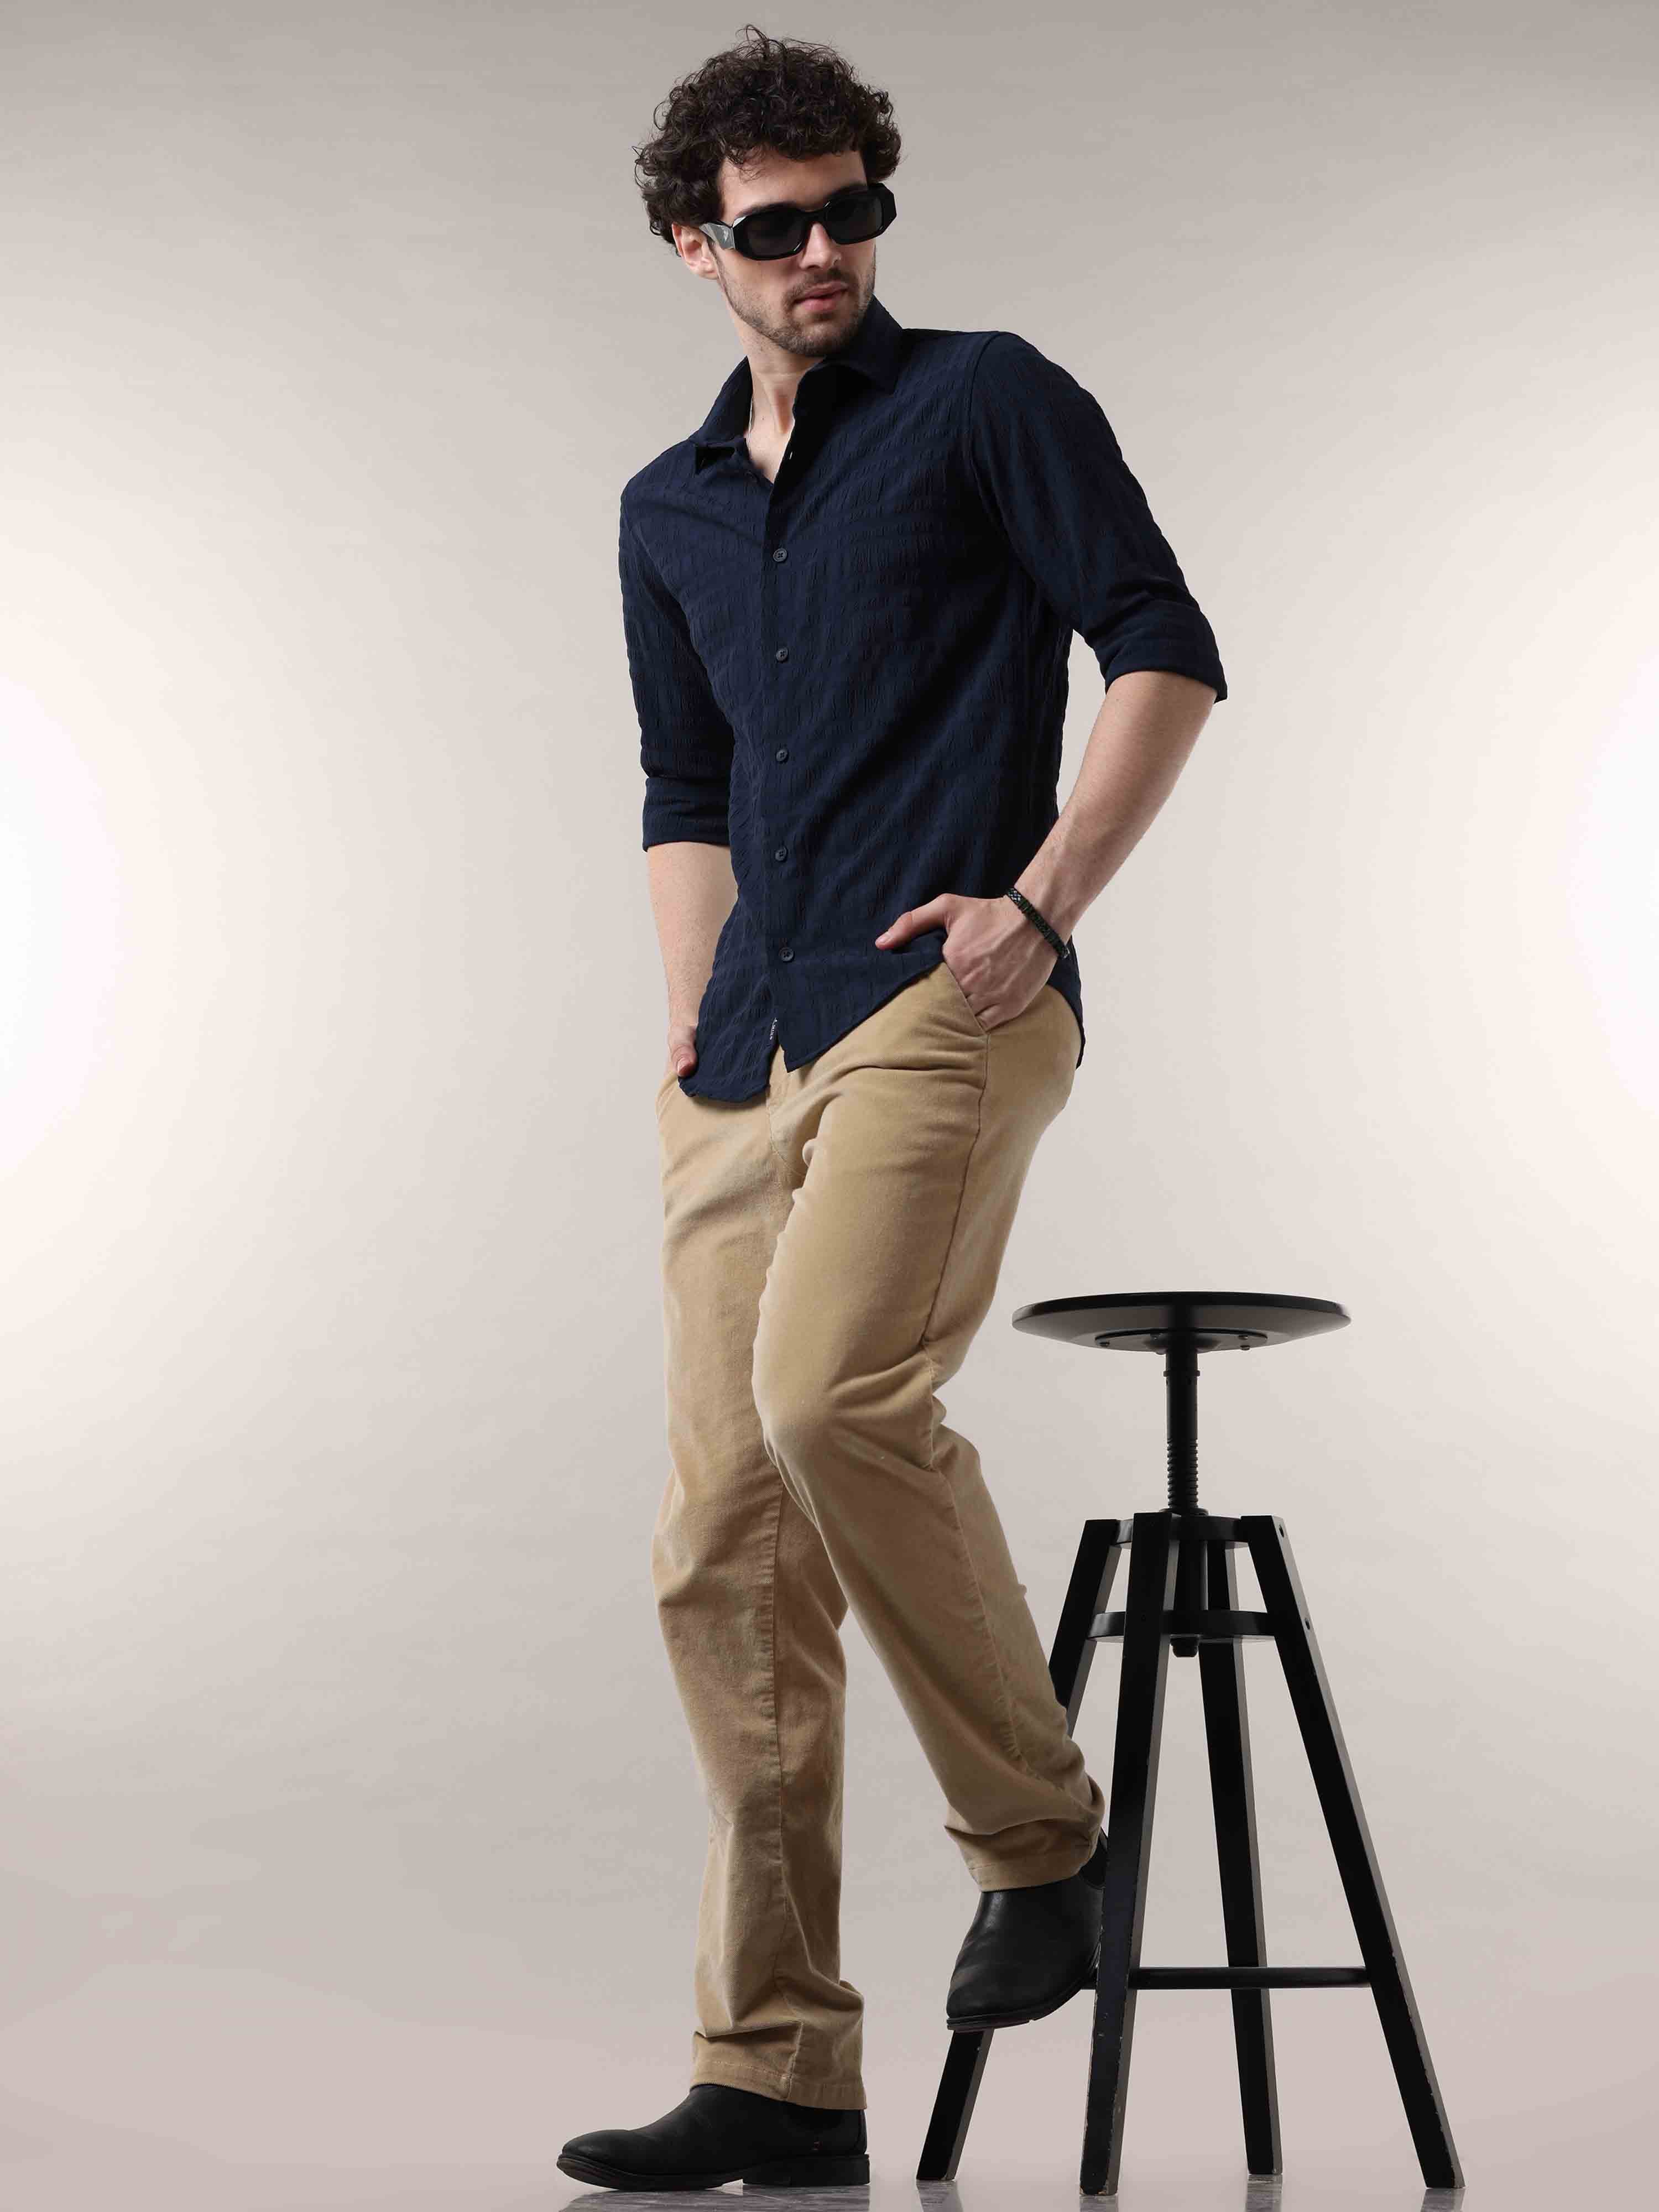 Buy Latest Celetial Navy Blue Colour Shirt OnlineRs. 1349.00